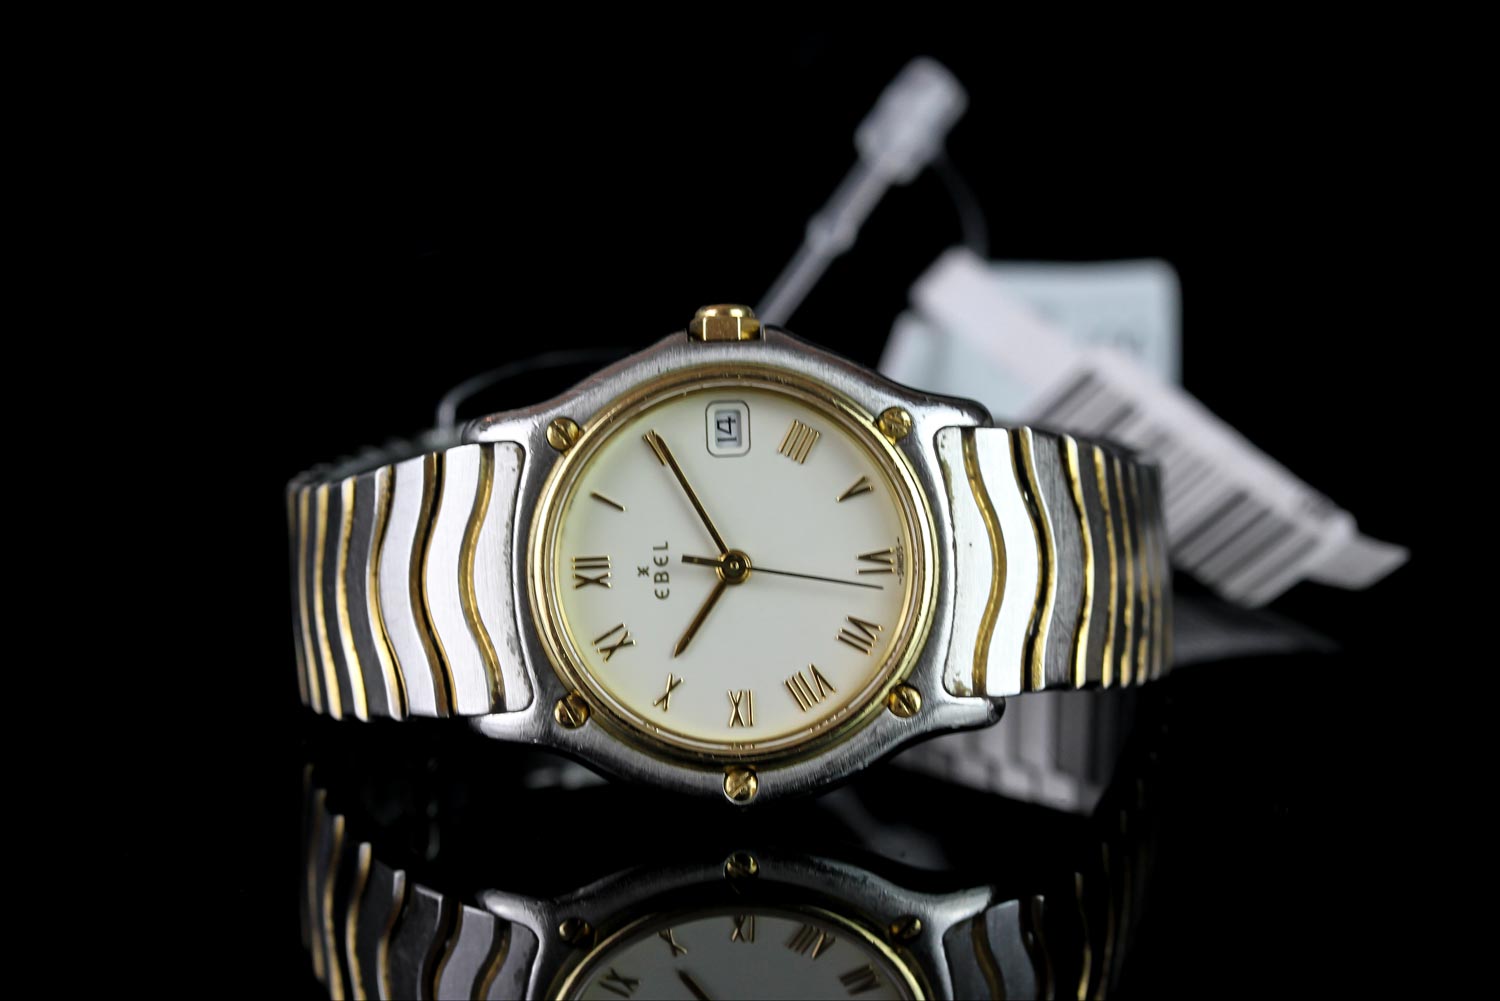 LADIES EBEL WAVE WRISTWATCH REF 183908, circular cream dial with gold roman numerals and hands, date